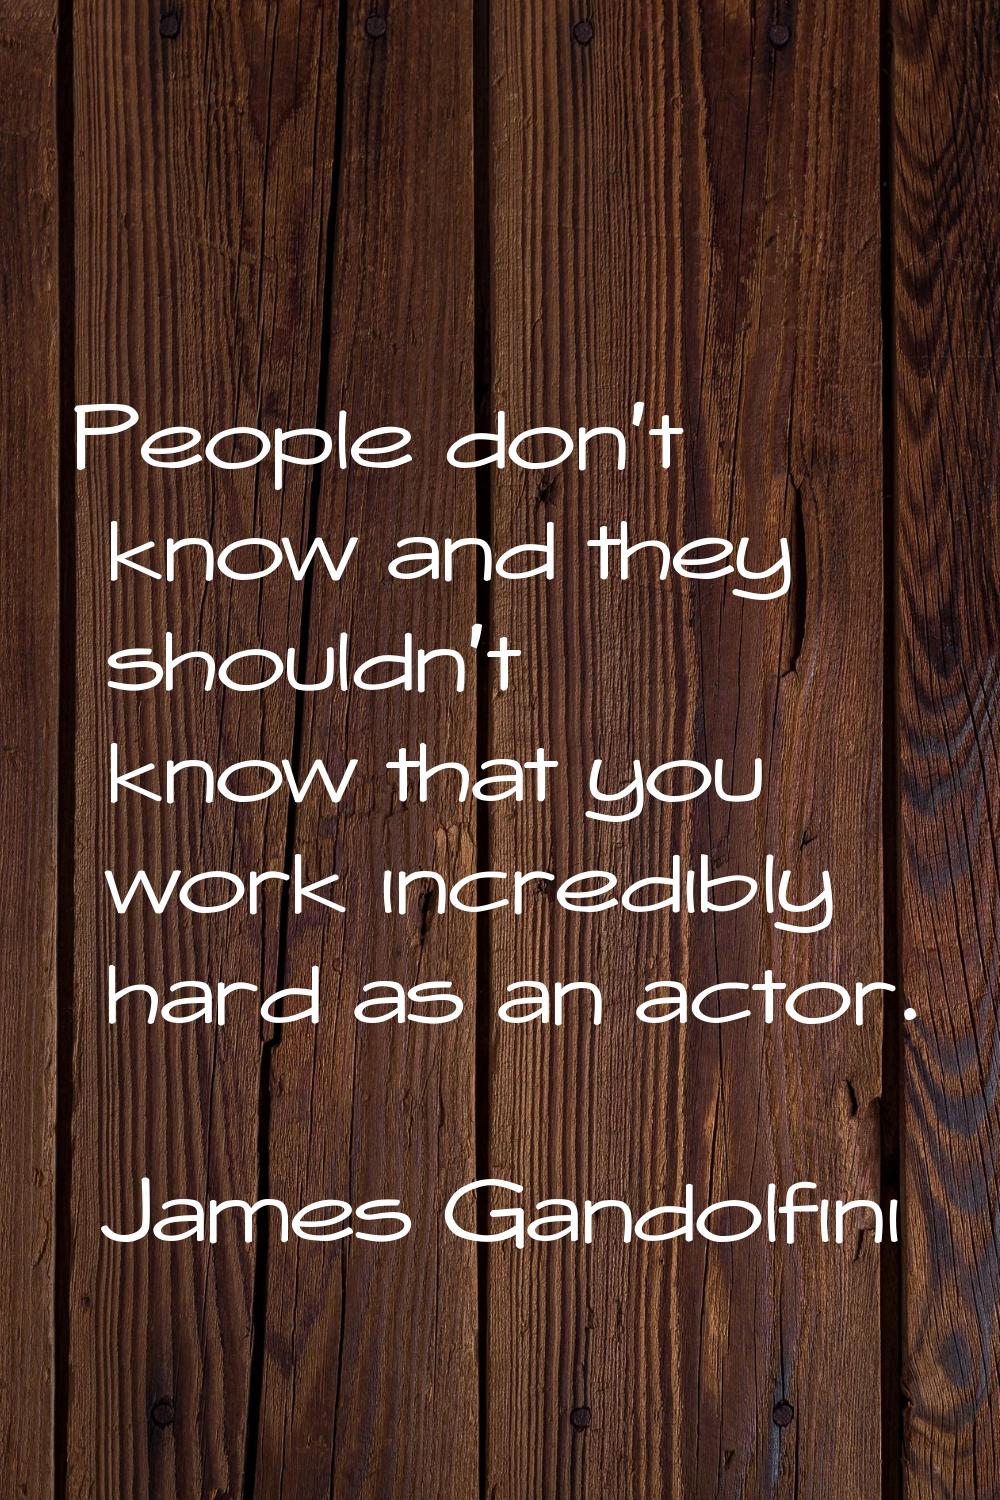 People don't know and they shouldn't know that you work incredibly hard as an actor.